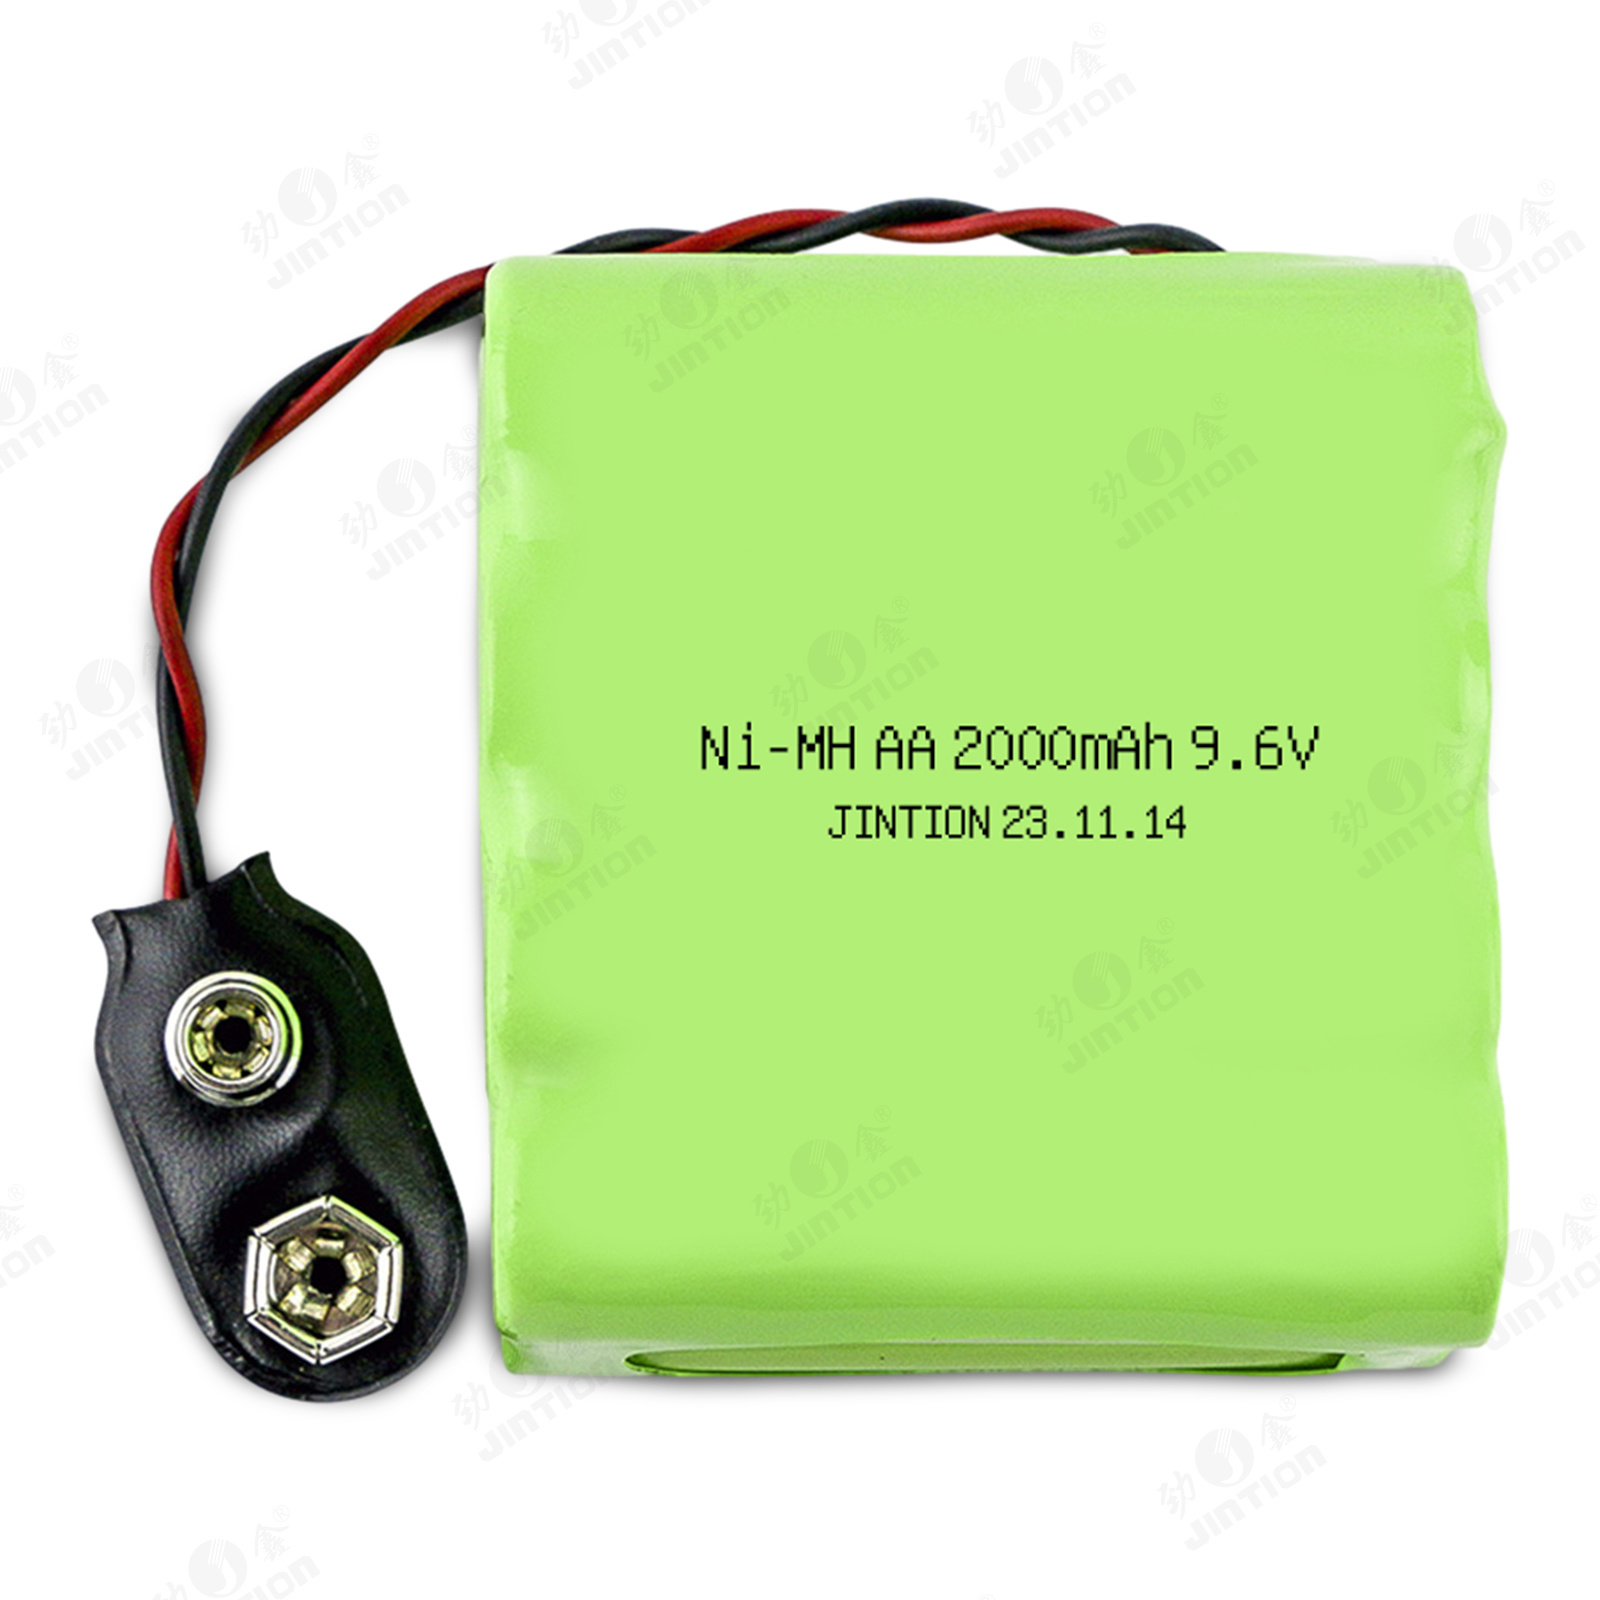 JINTION NiMh AA 2000mAh 9.6V rechargeable battery AA rechargeable batteries for Visonic Powermax Alarm system